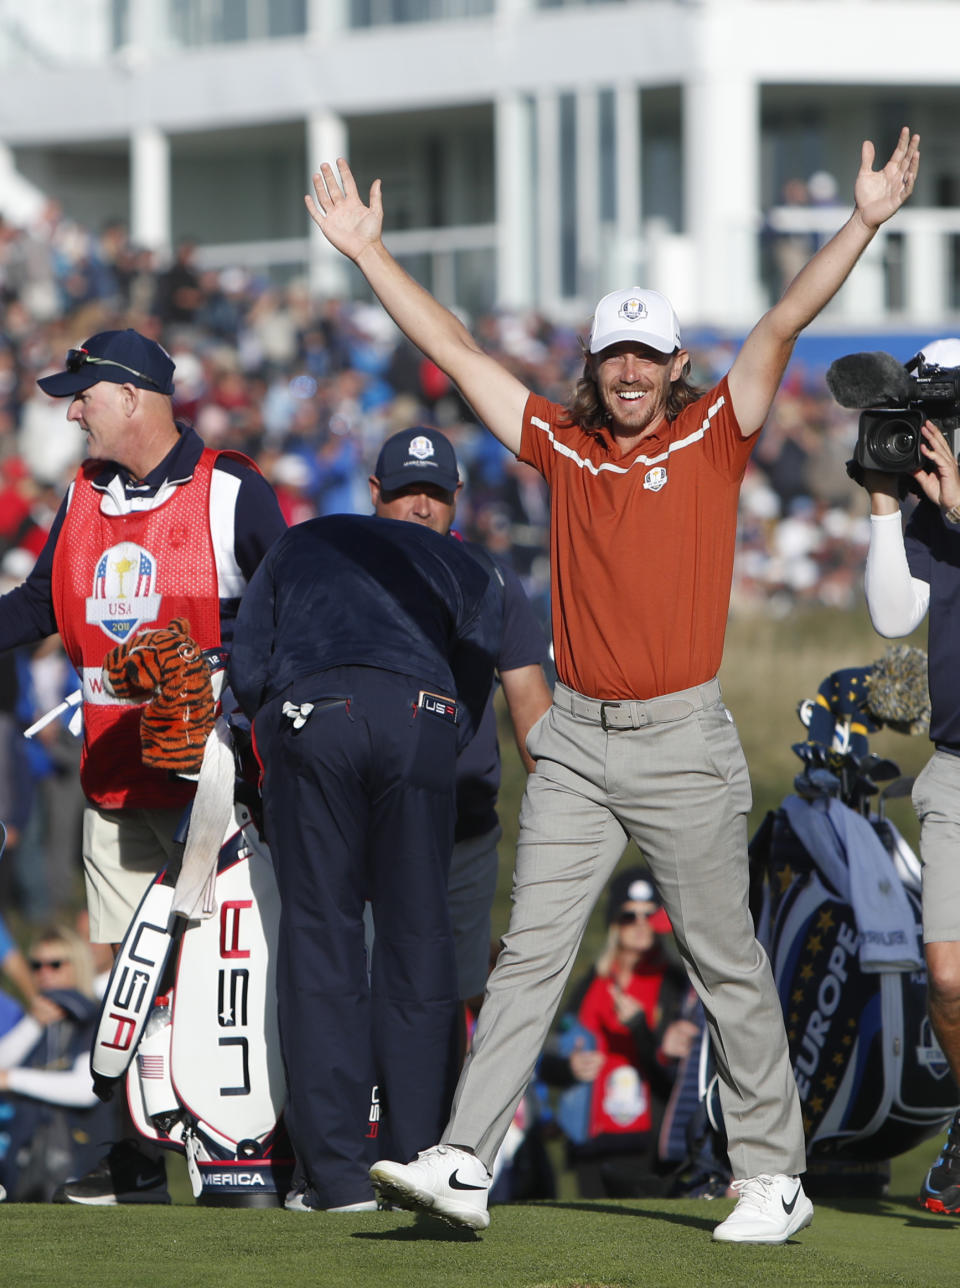 Europe's Tommy Fleetwood, right, celebrates next to Tiger Woods of the US after winning a foursome match on the second day of the 42nd Ryder Cup at Le Golf National in Saint-Quentin-en-Yvelines, outside Paris, France, Saturday, Sept. 29, 2018. Europe's Francesco Molinari and Tommy Fleetwood beat Tiger Woods of the US and Bryson Dechambeau of the US 5 and 4. (AP Photo/Alastair Grant)